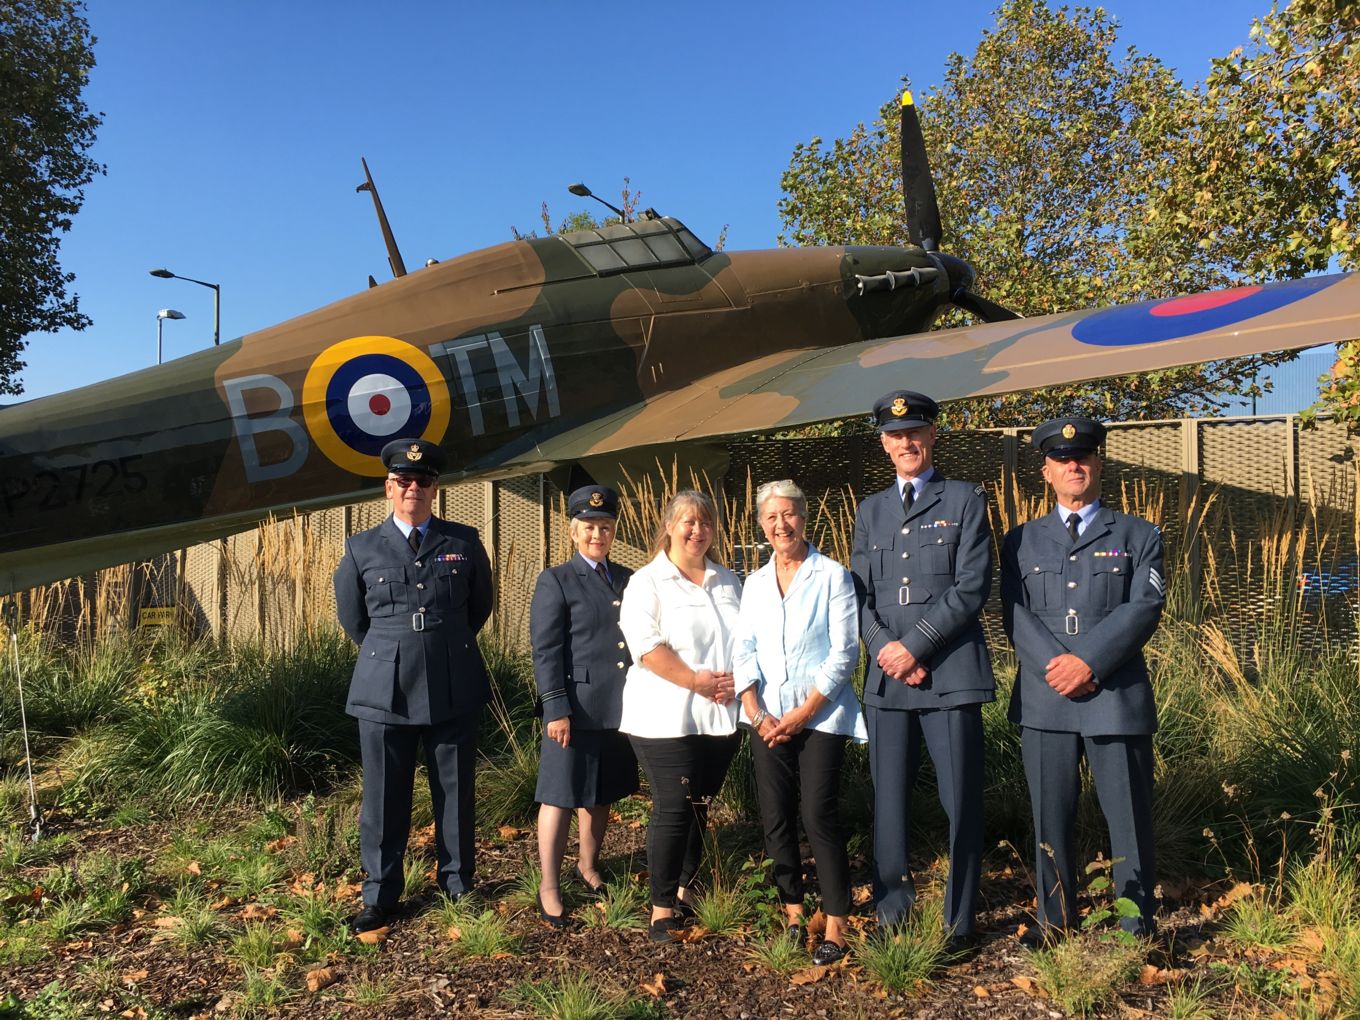 From left to right: WO David Dundas, Flt Lt Jill Harrison, Mrs Kate Whitworth (daughter of Ray Holmes), Mrs Anne Holmes, Sqn Ldr Andy Ham, Sgt Nick Woolmer with the Hurricane gate guardian at the RAF Museum in Hendon.